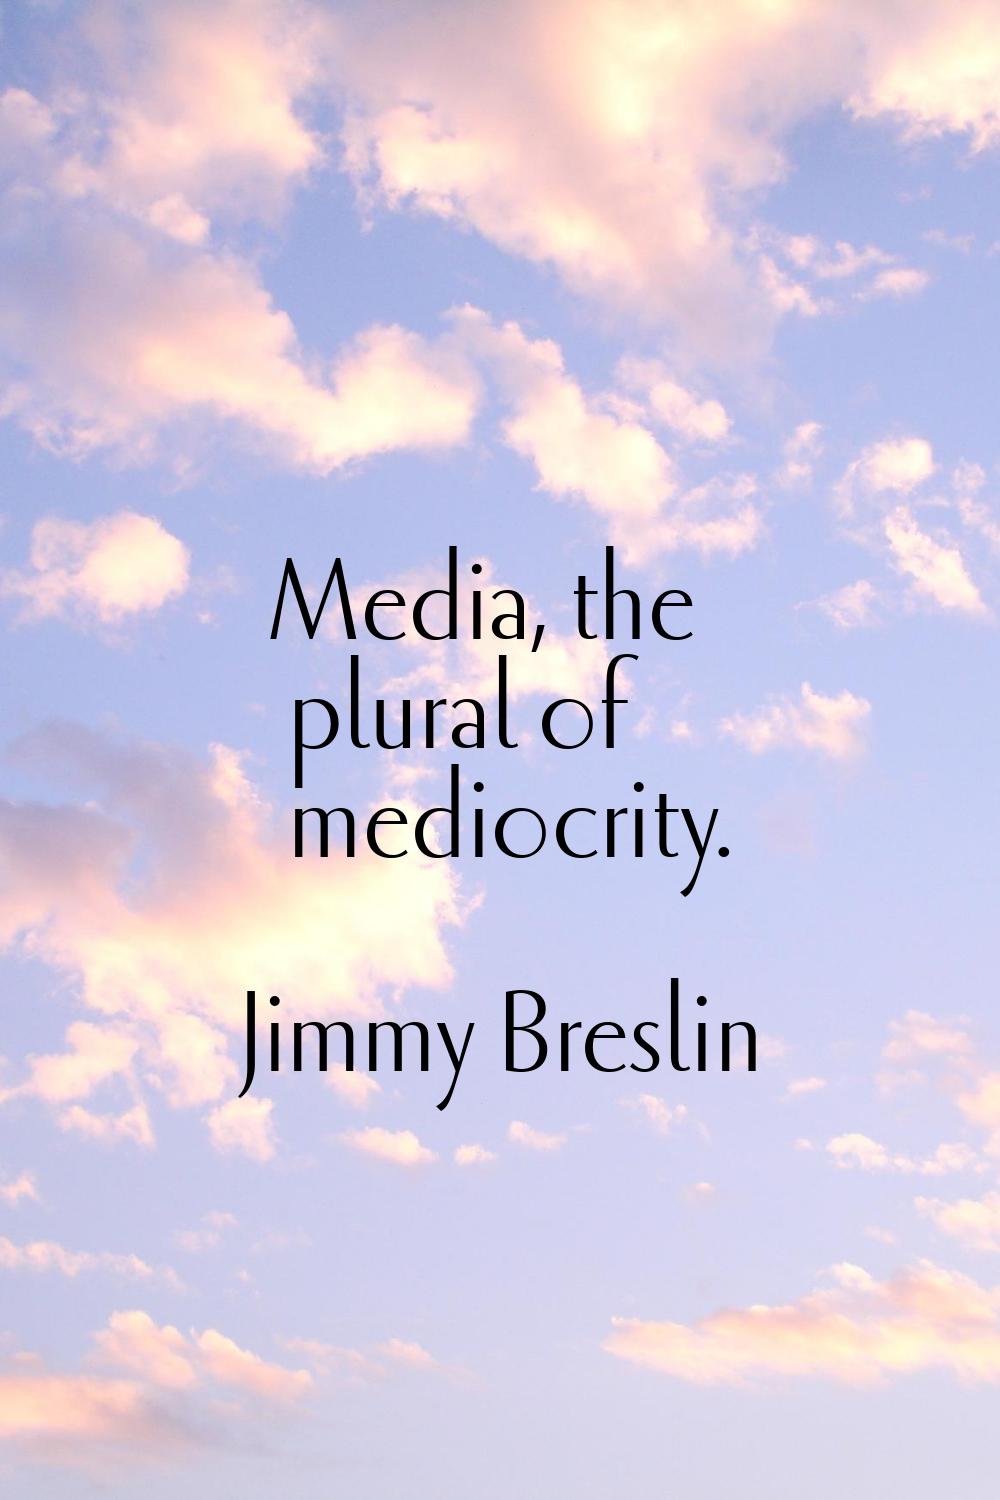 Media, the plural of mediocrity.